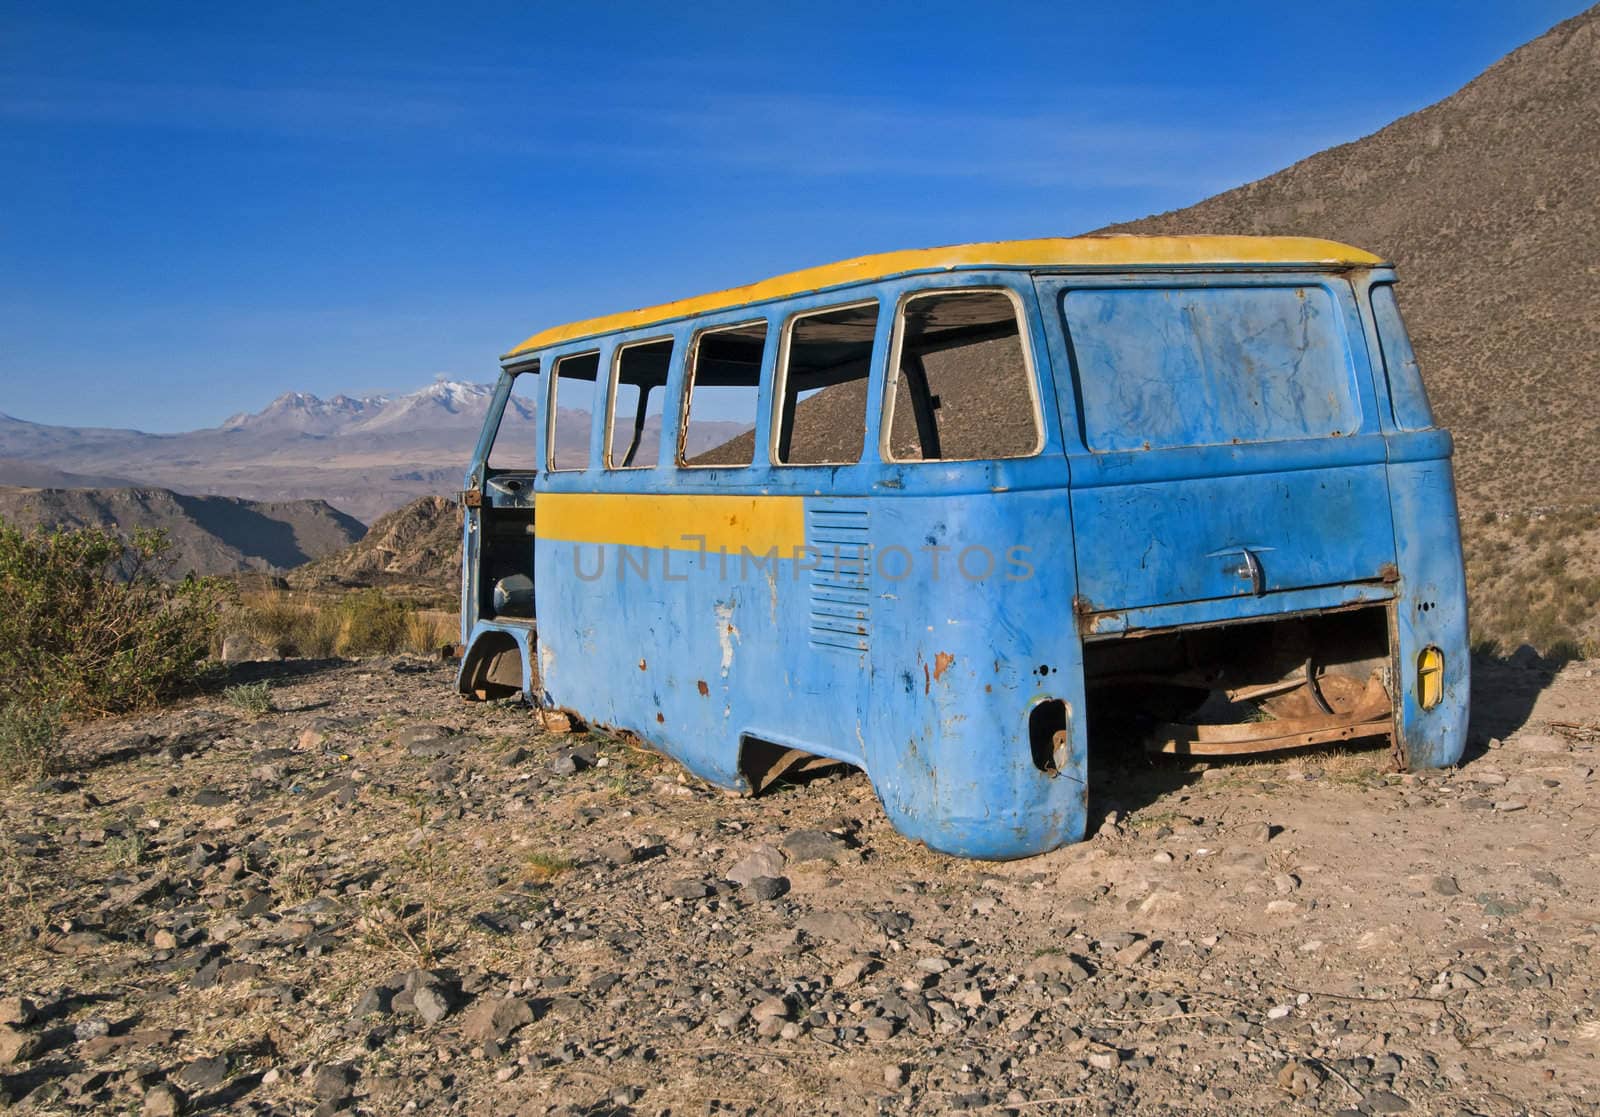 Abandoned in the Colca Canyon in Peru